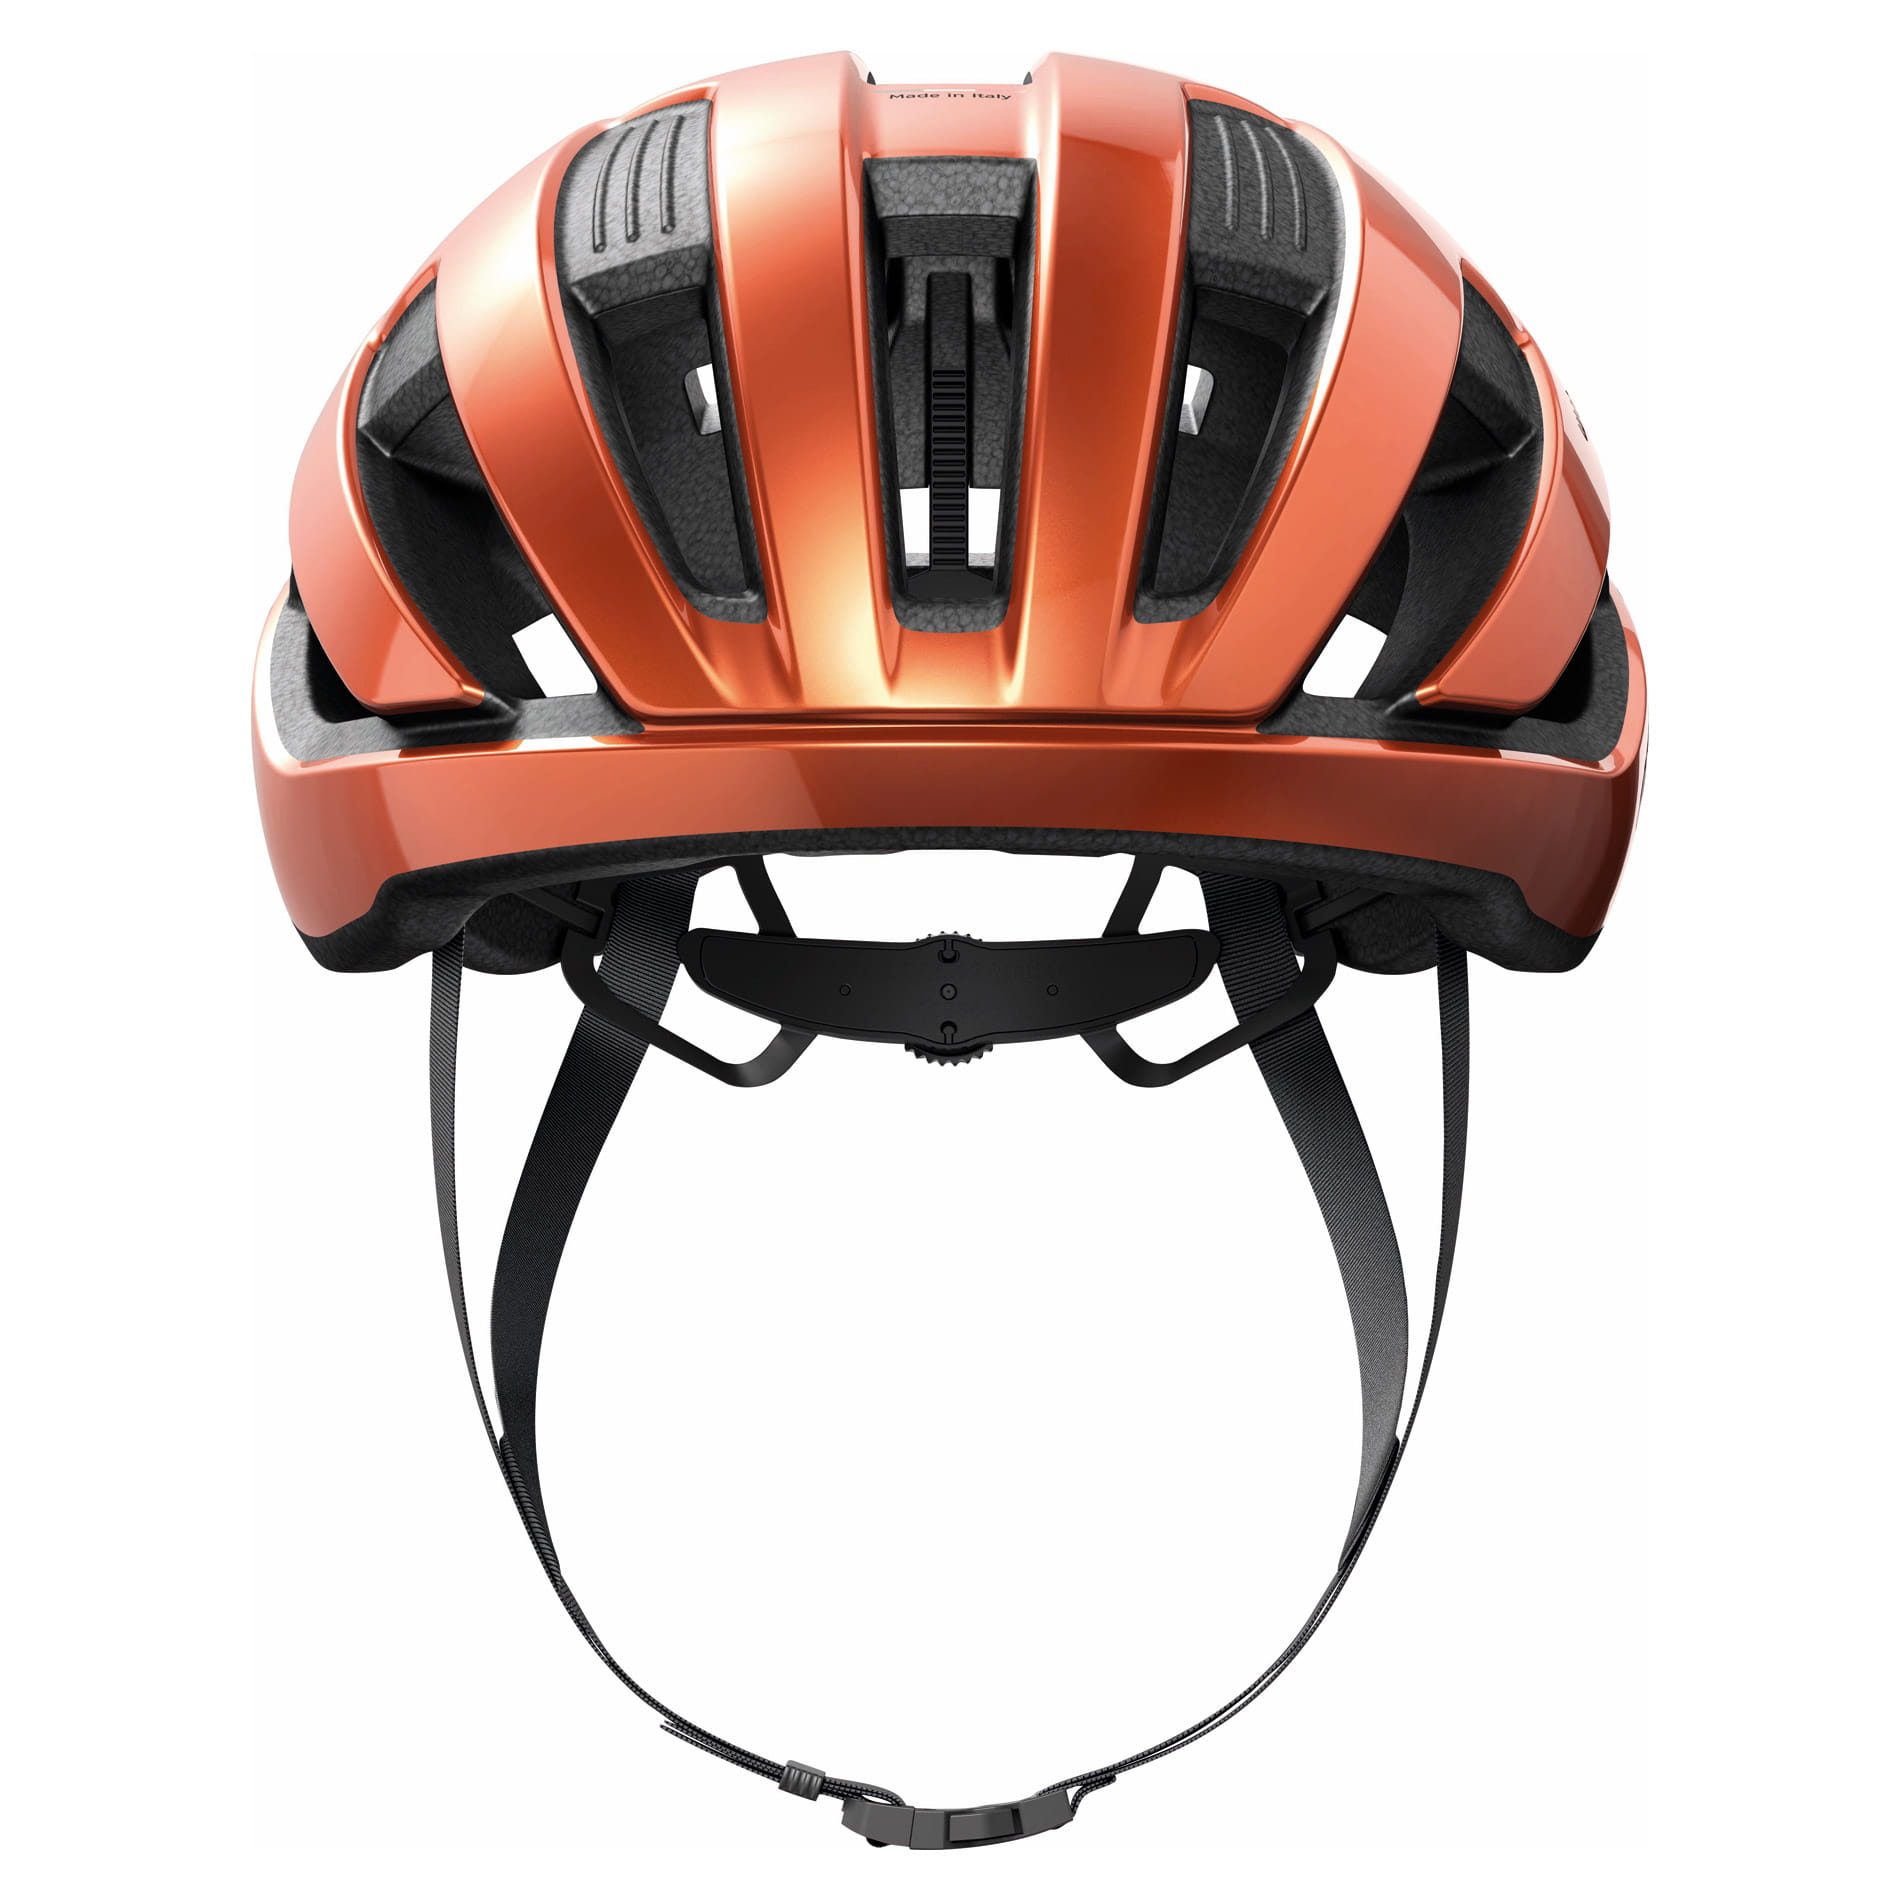 ABUS WingBack Road Helm